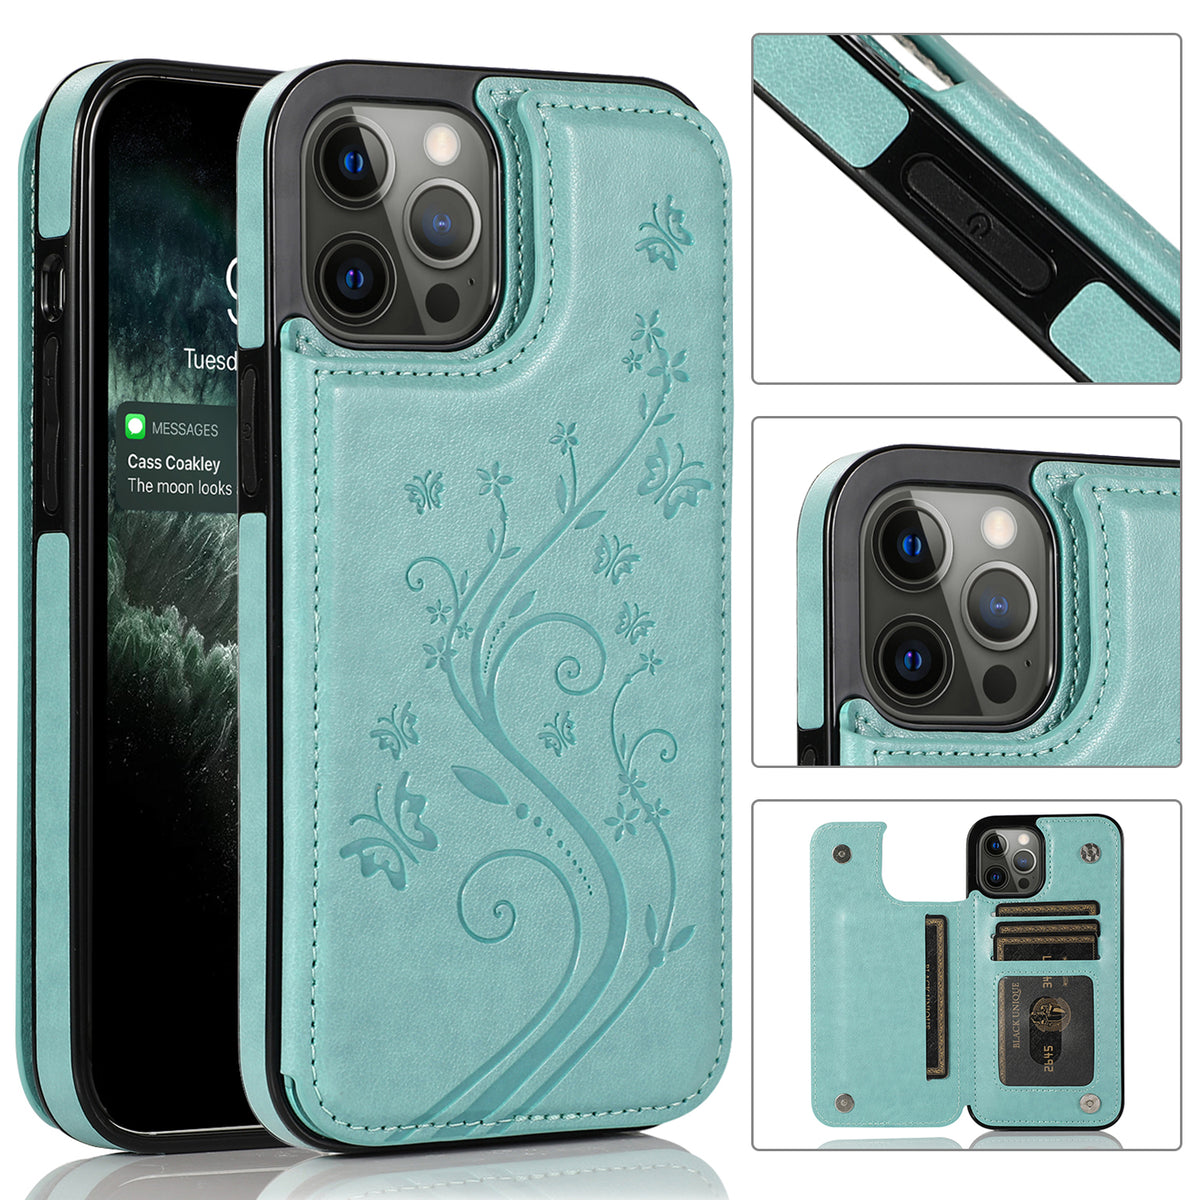 Iphone 12Pro Max ( 6.7Inch) Backflip Design Leather Case Teal